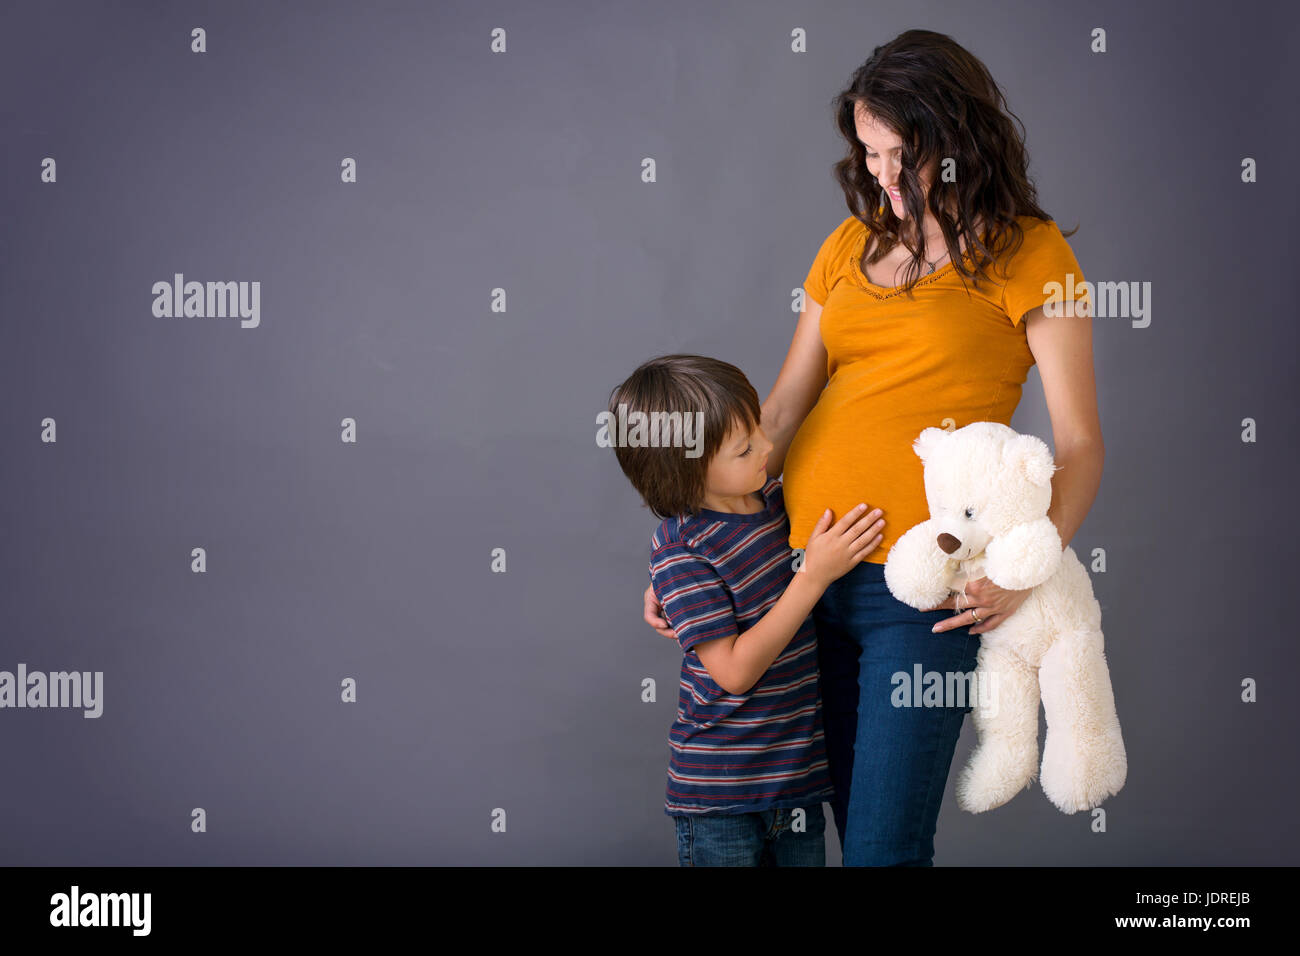 Little child, boy, hugging his pregnant mother at home, isolated image, copy space. Family concept Stock Photo